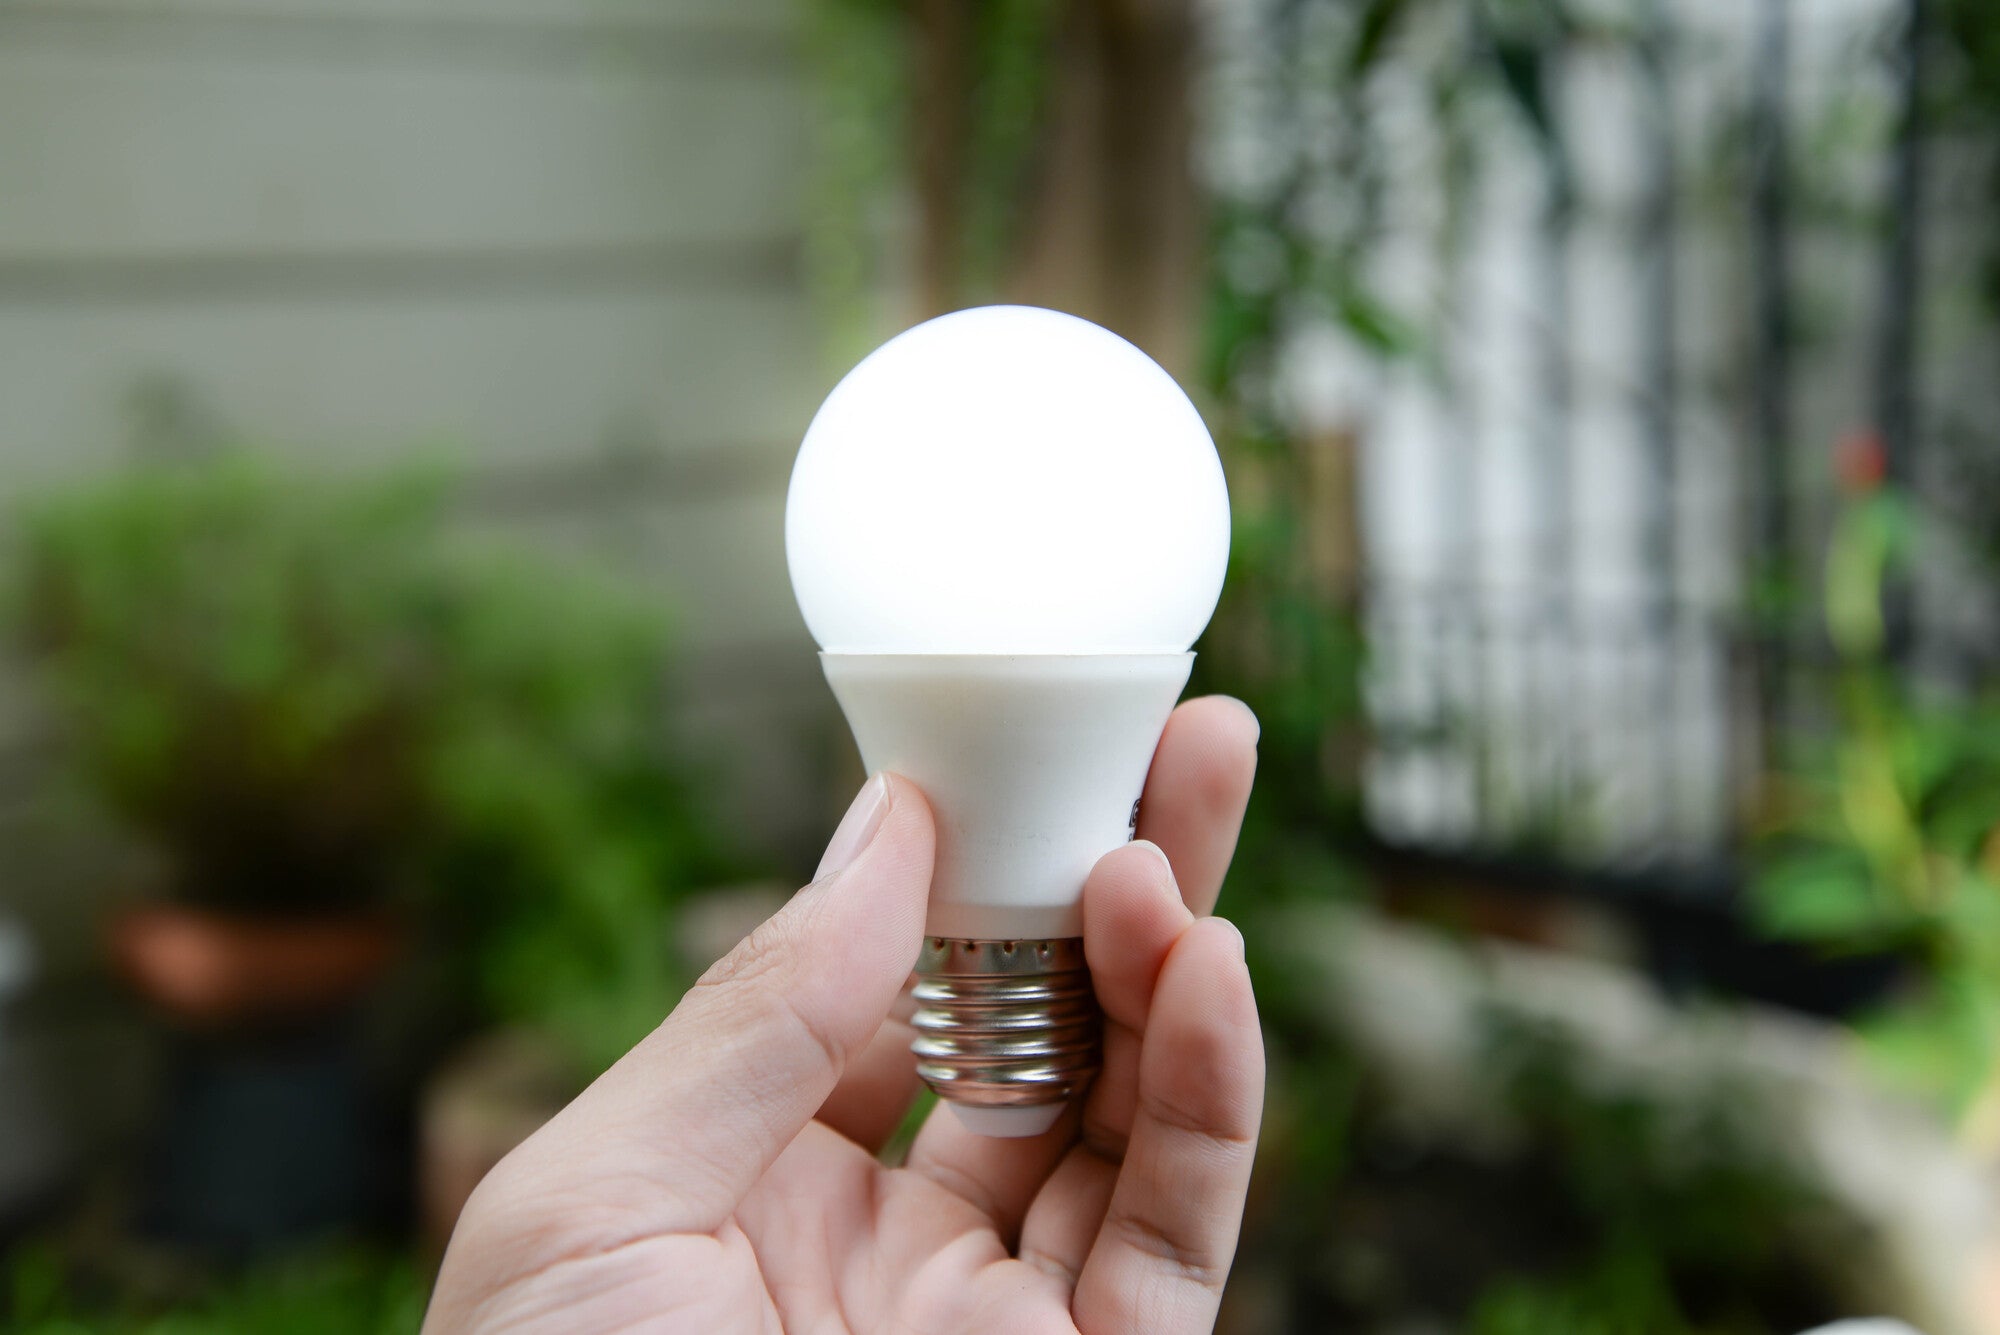 5 Benefits Of LED Lighting: How It Helps The Environment